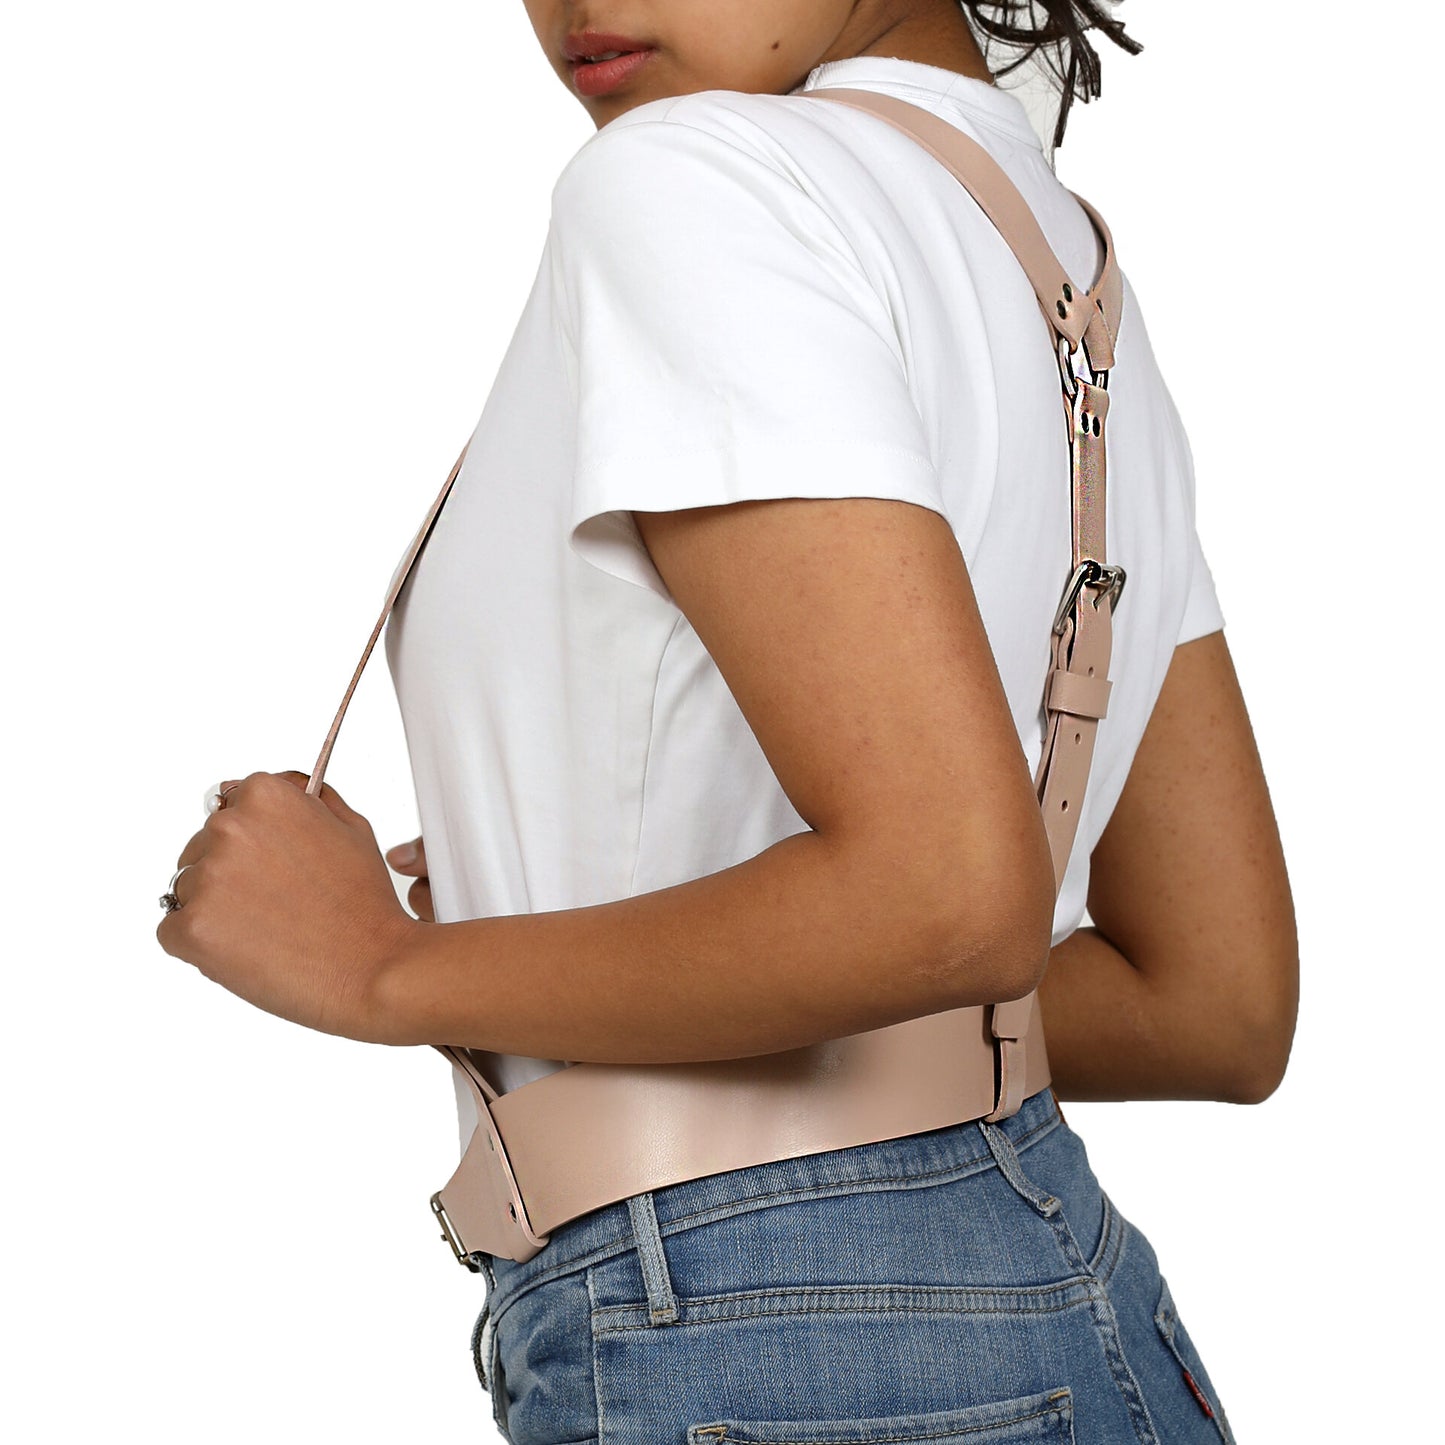 WOMENS LEATHER SHOULDER SUSPENDER HARNESS - Subculture